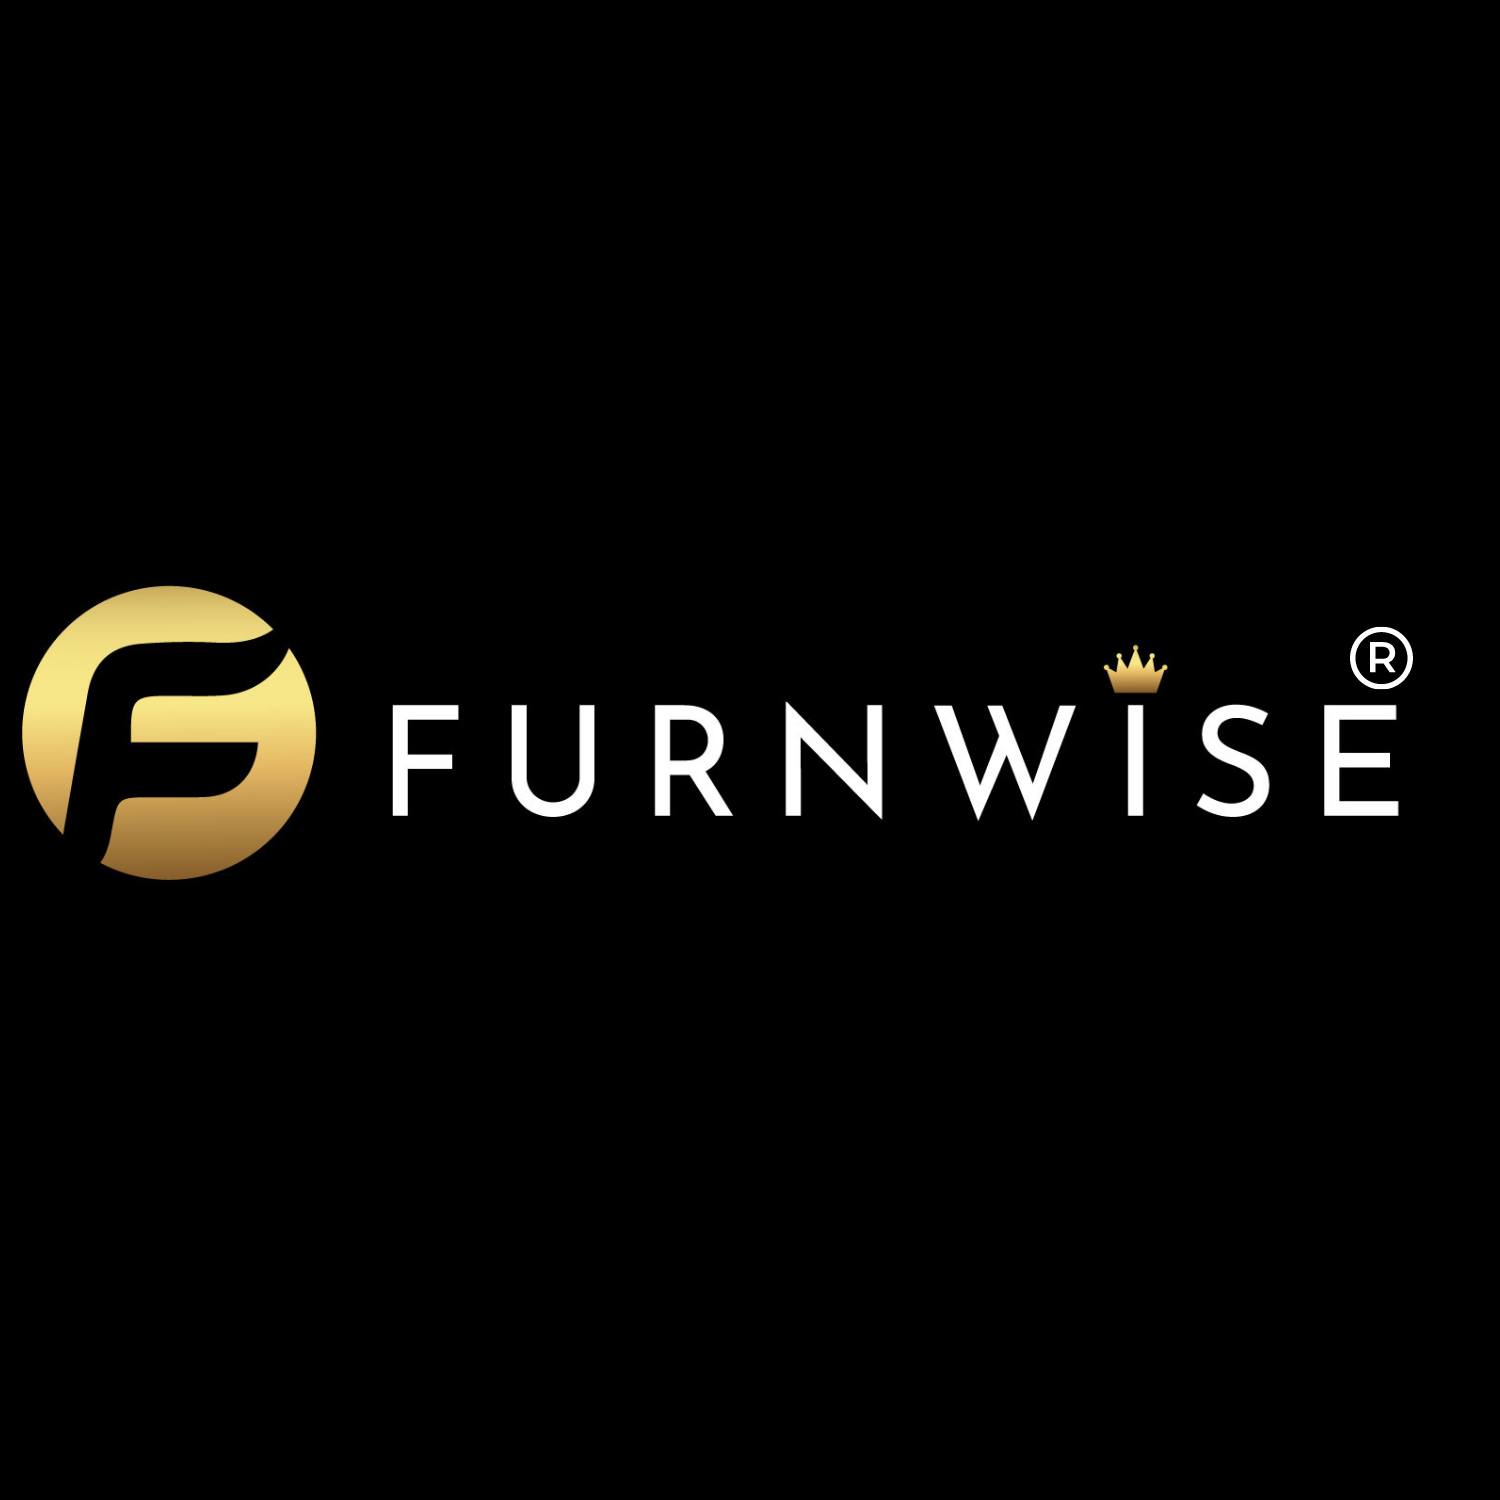 Furnwise Coupons & Promo Codes